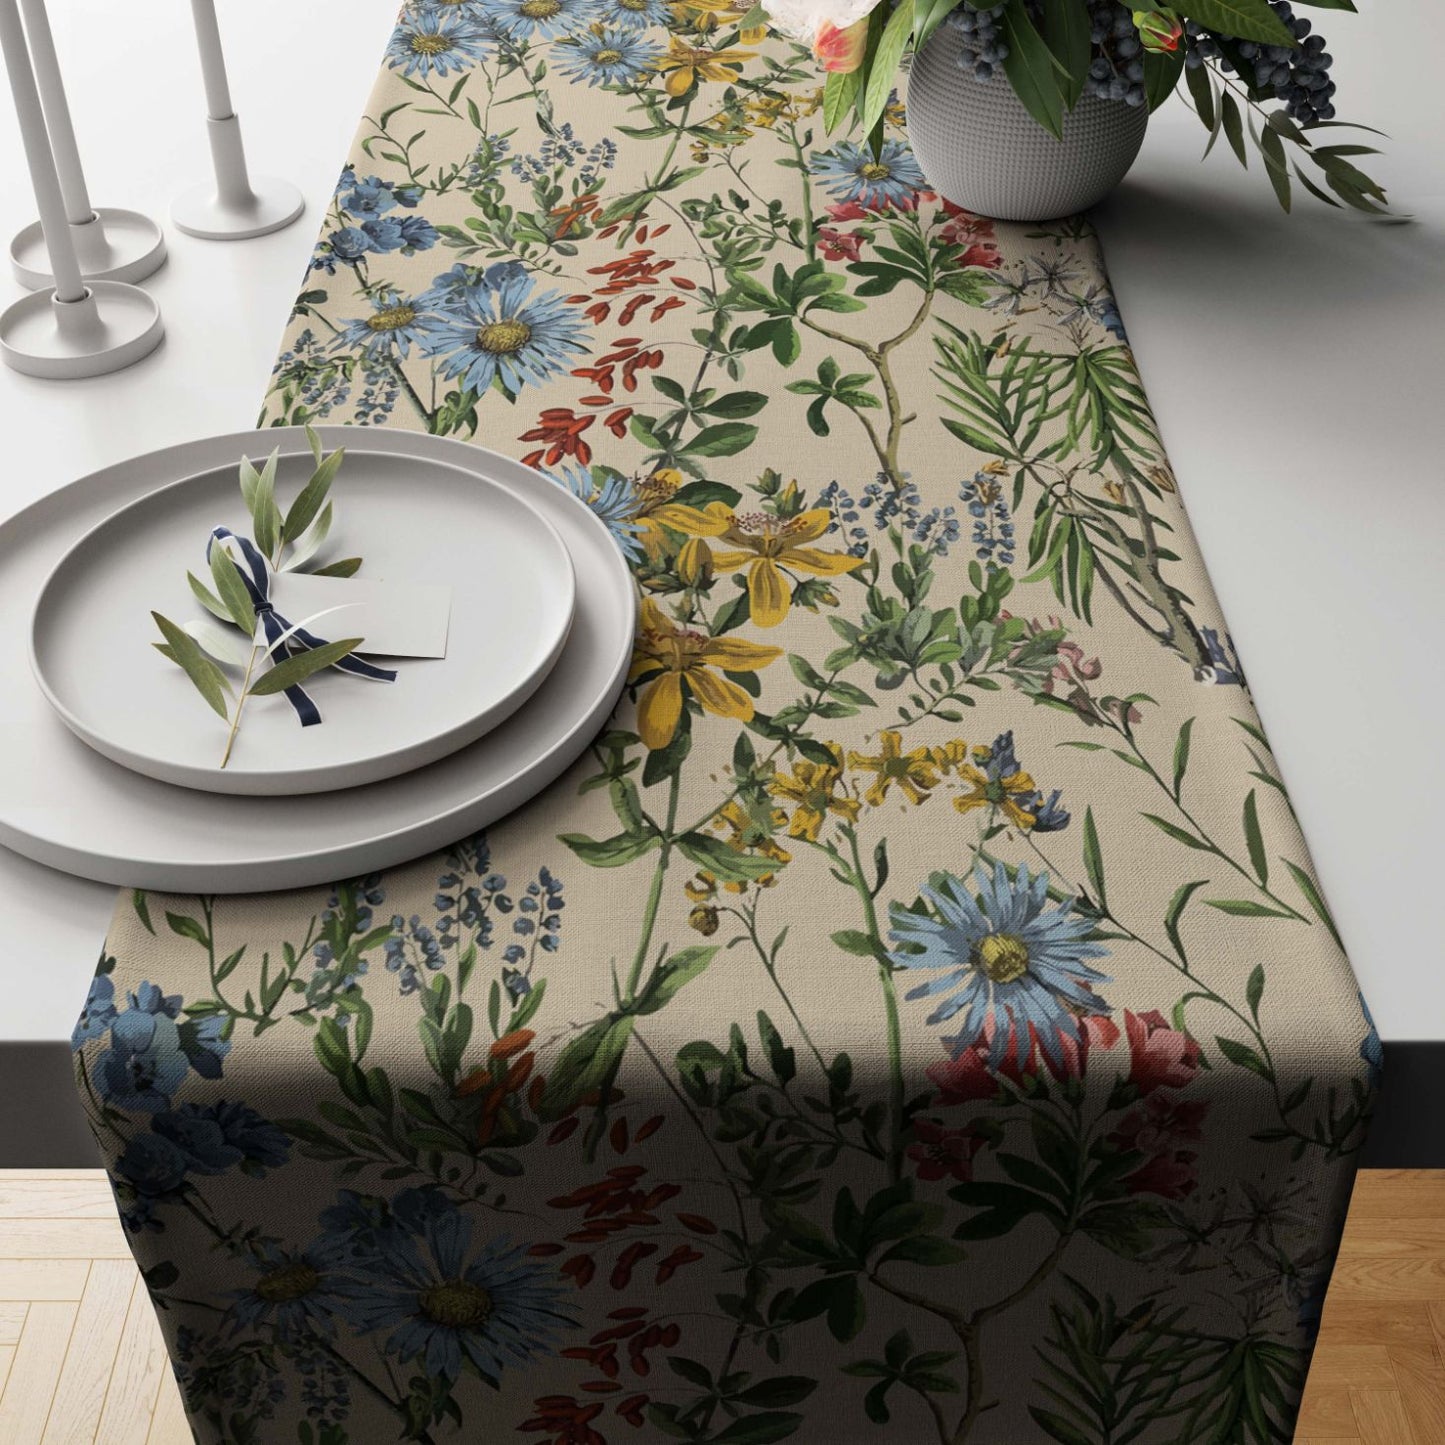 Floral Clash Table Runner Trendy Home